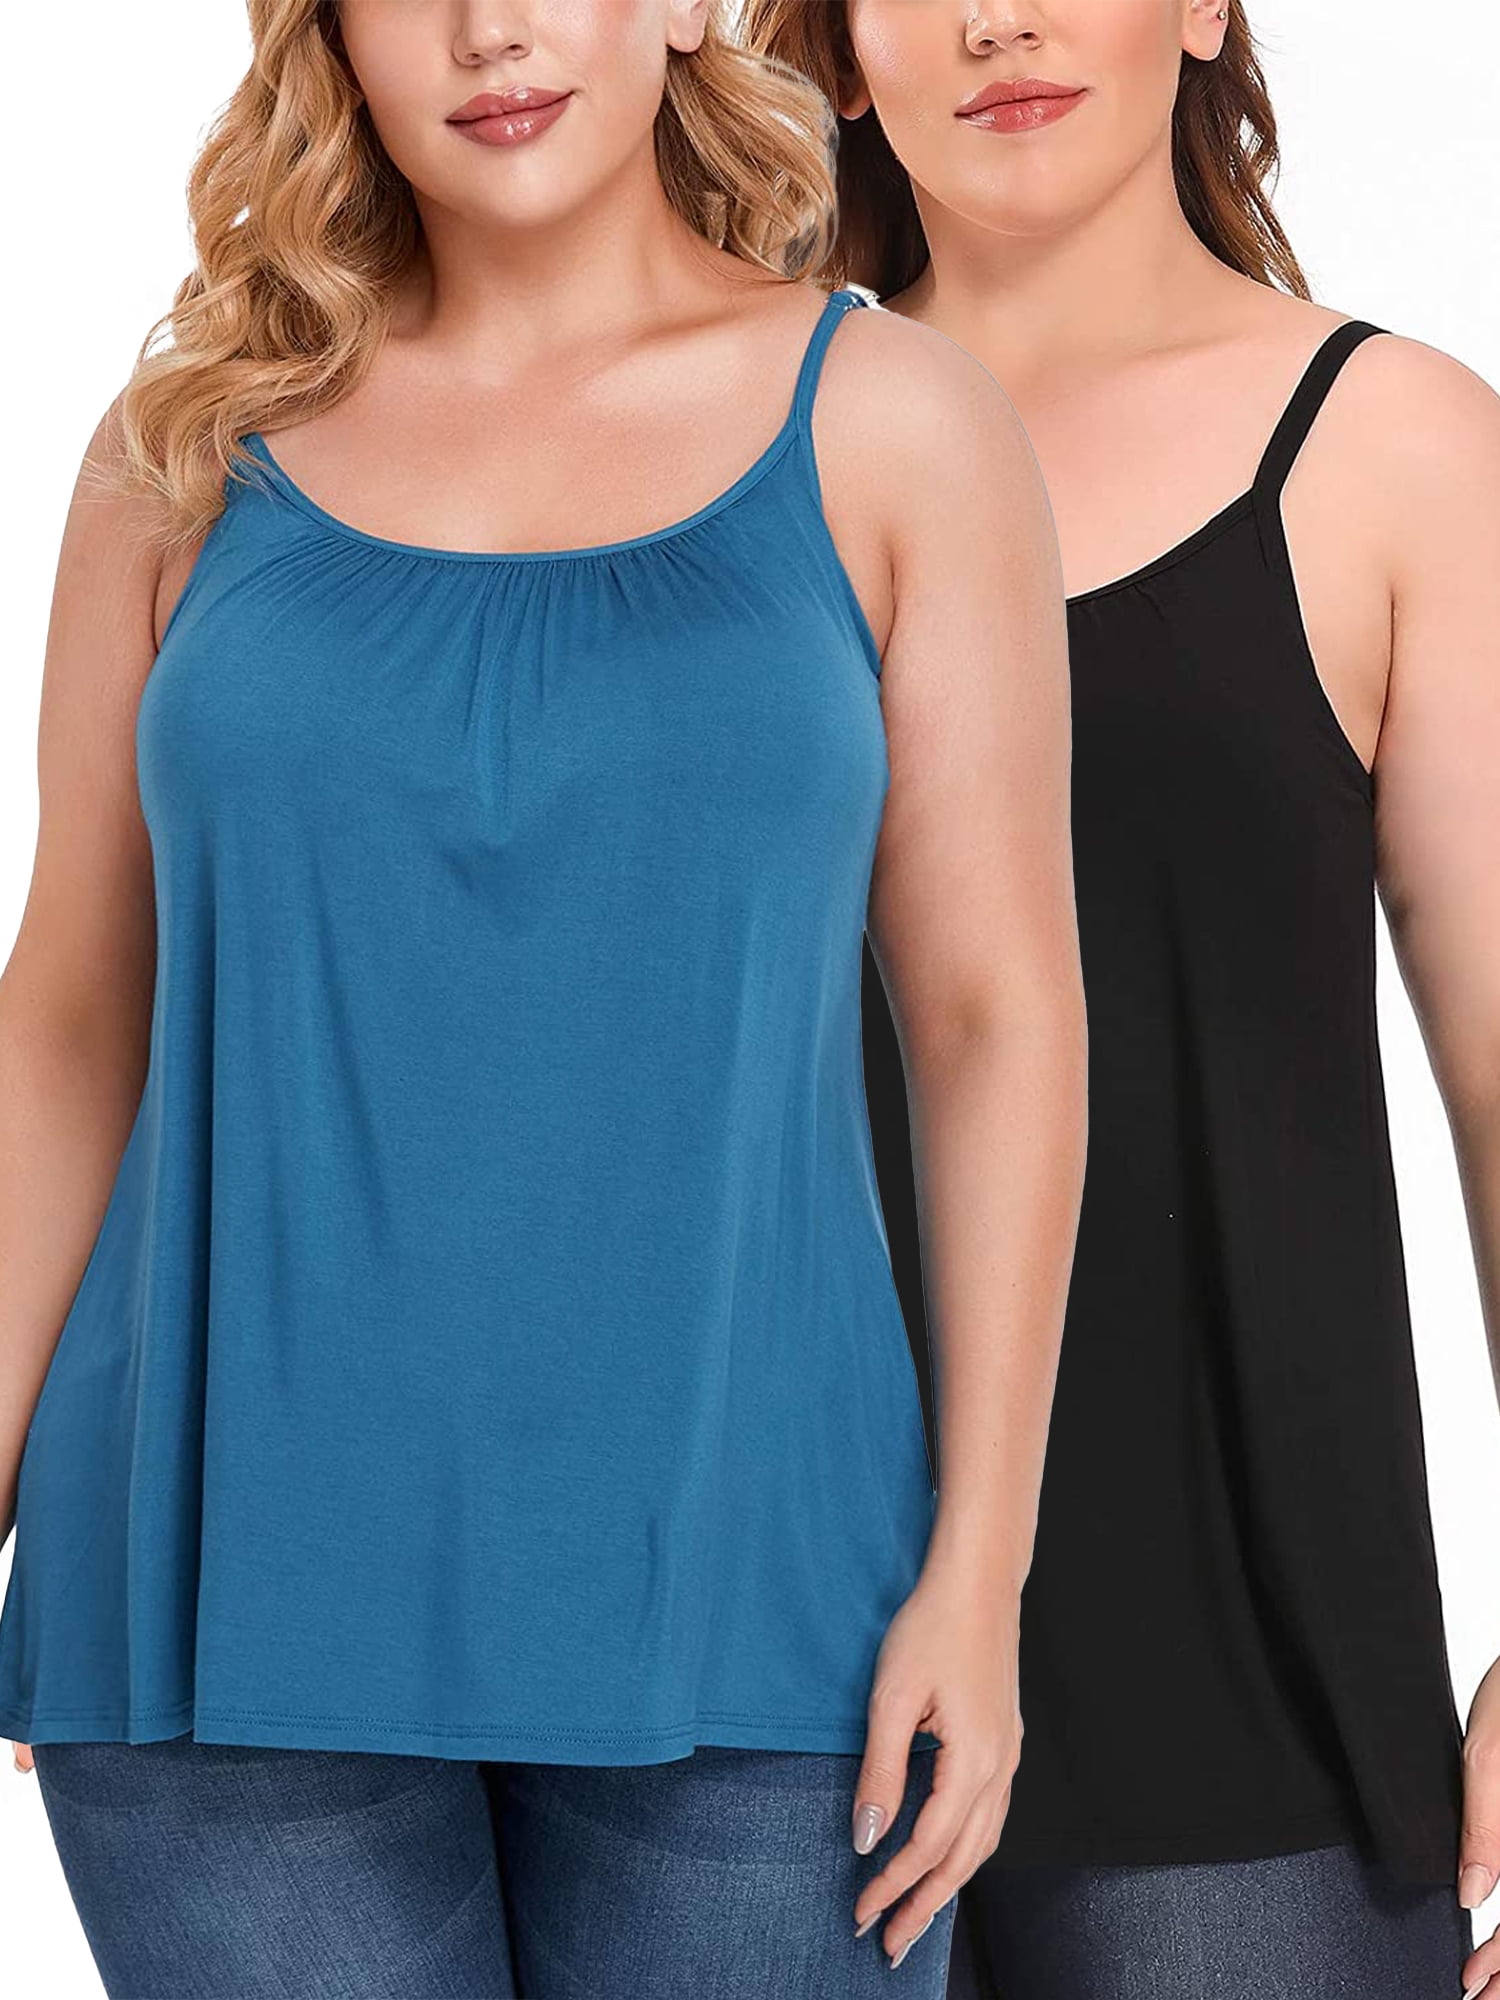 FITVALEN Women's Camisole with Built in Bra Plus Size Casual Loose Tank Tops  Sleeveless Shirts Adjustable Straps (S-4XL） 